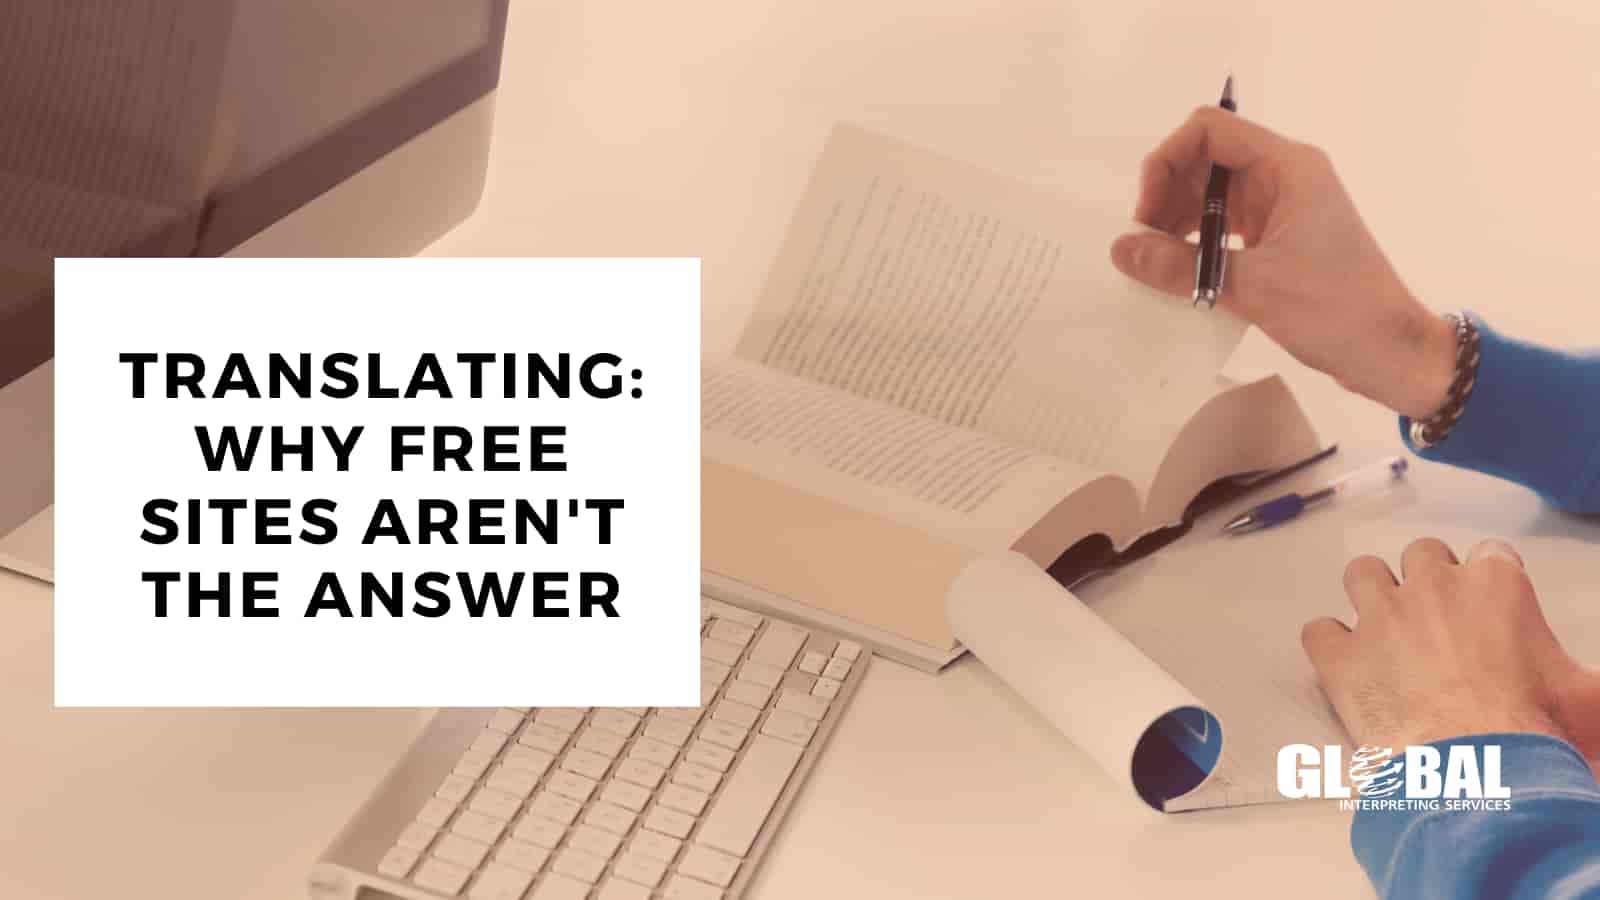 Translating: Why Free Sites aren't the answer